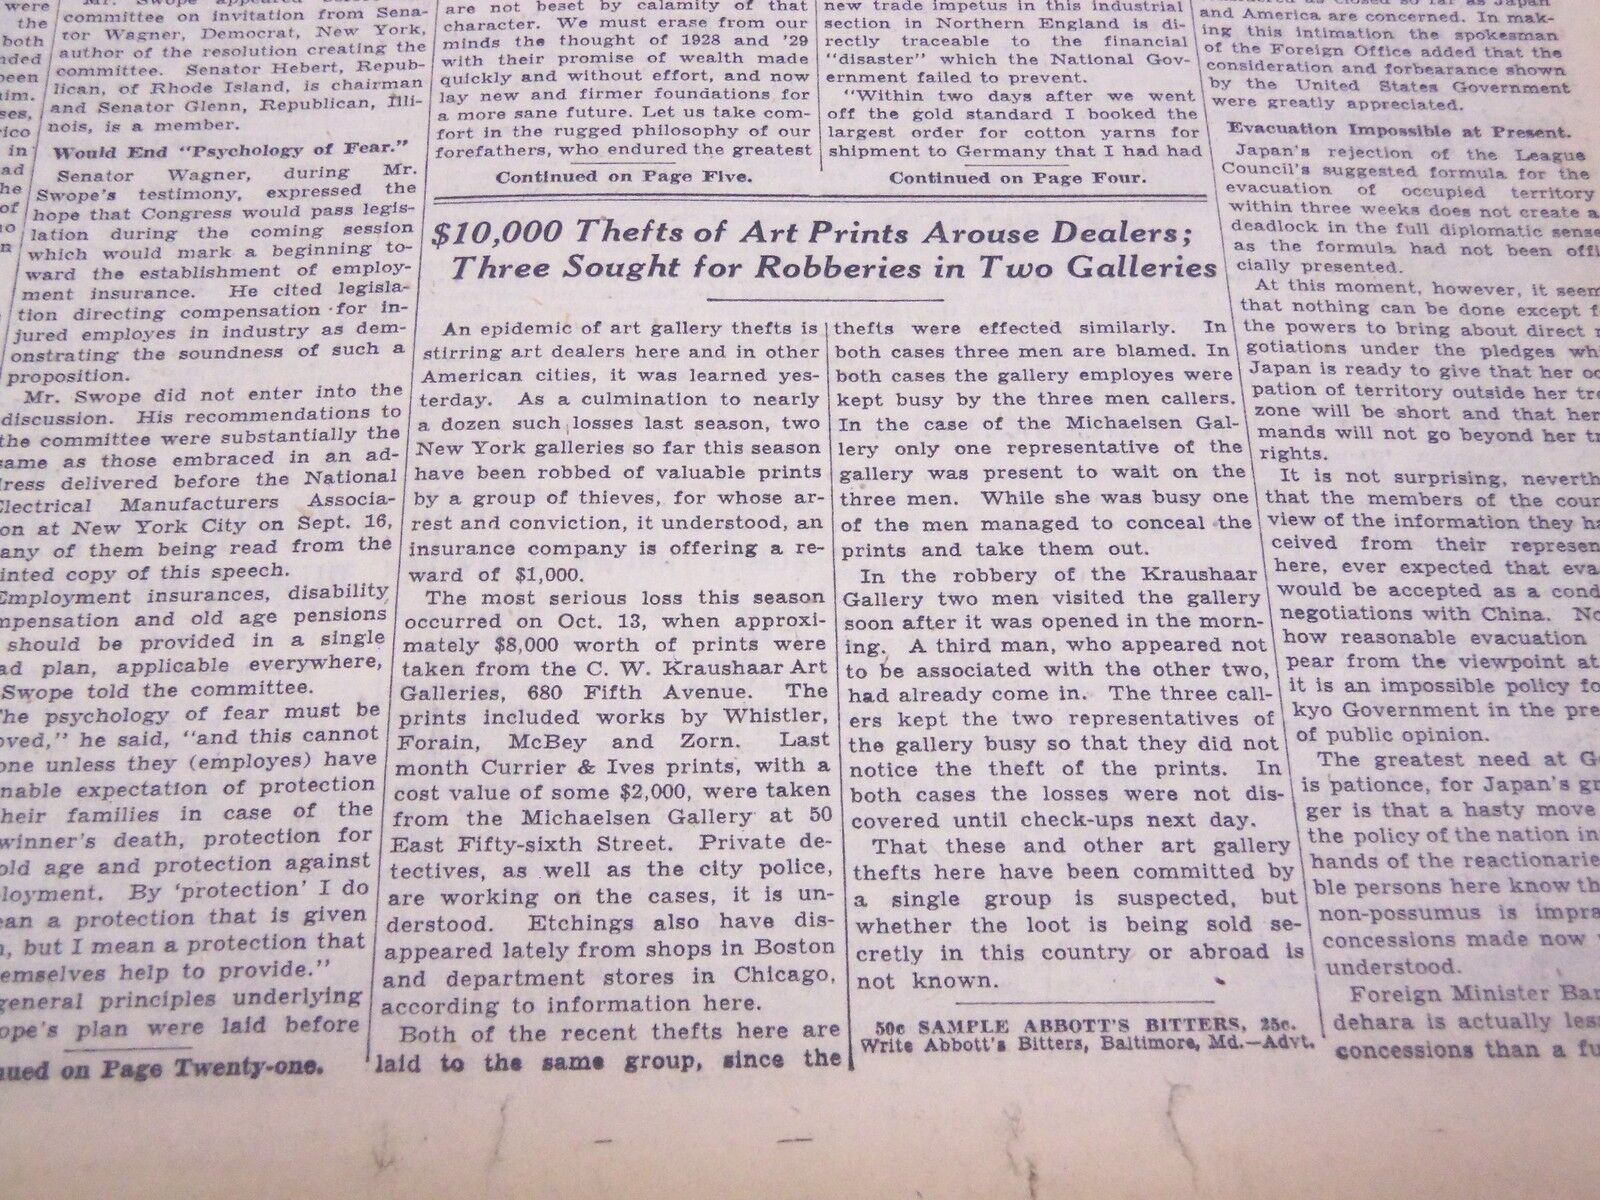 1931 OCTOBER 20 NEW YORK TIMES - 10,000 MOURNERS PASS EDISON'S BIER - NT 5013